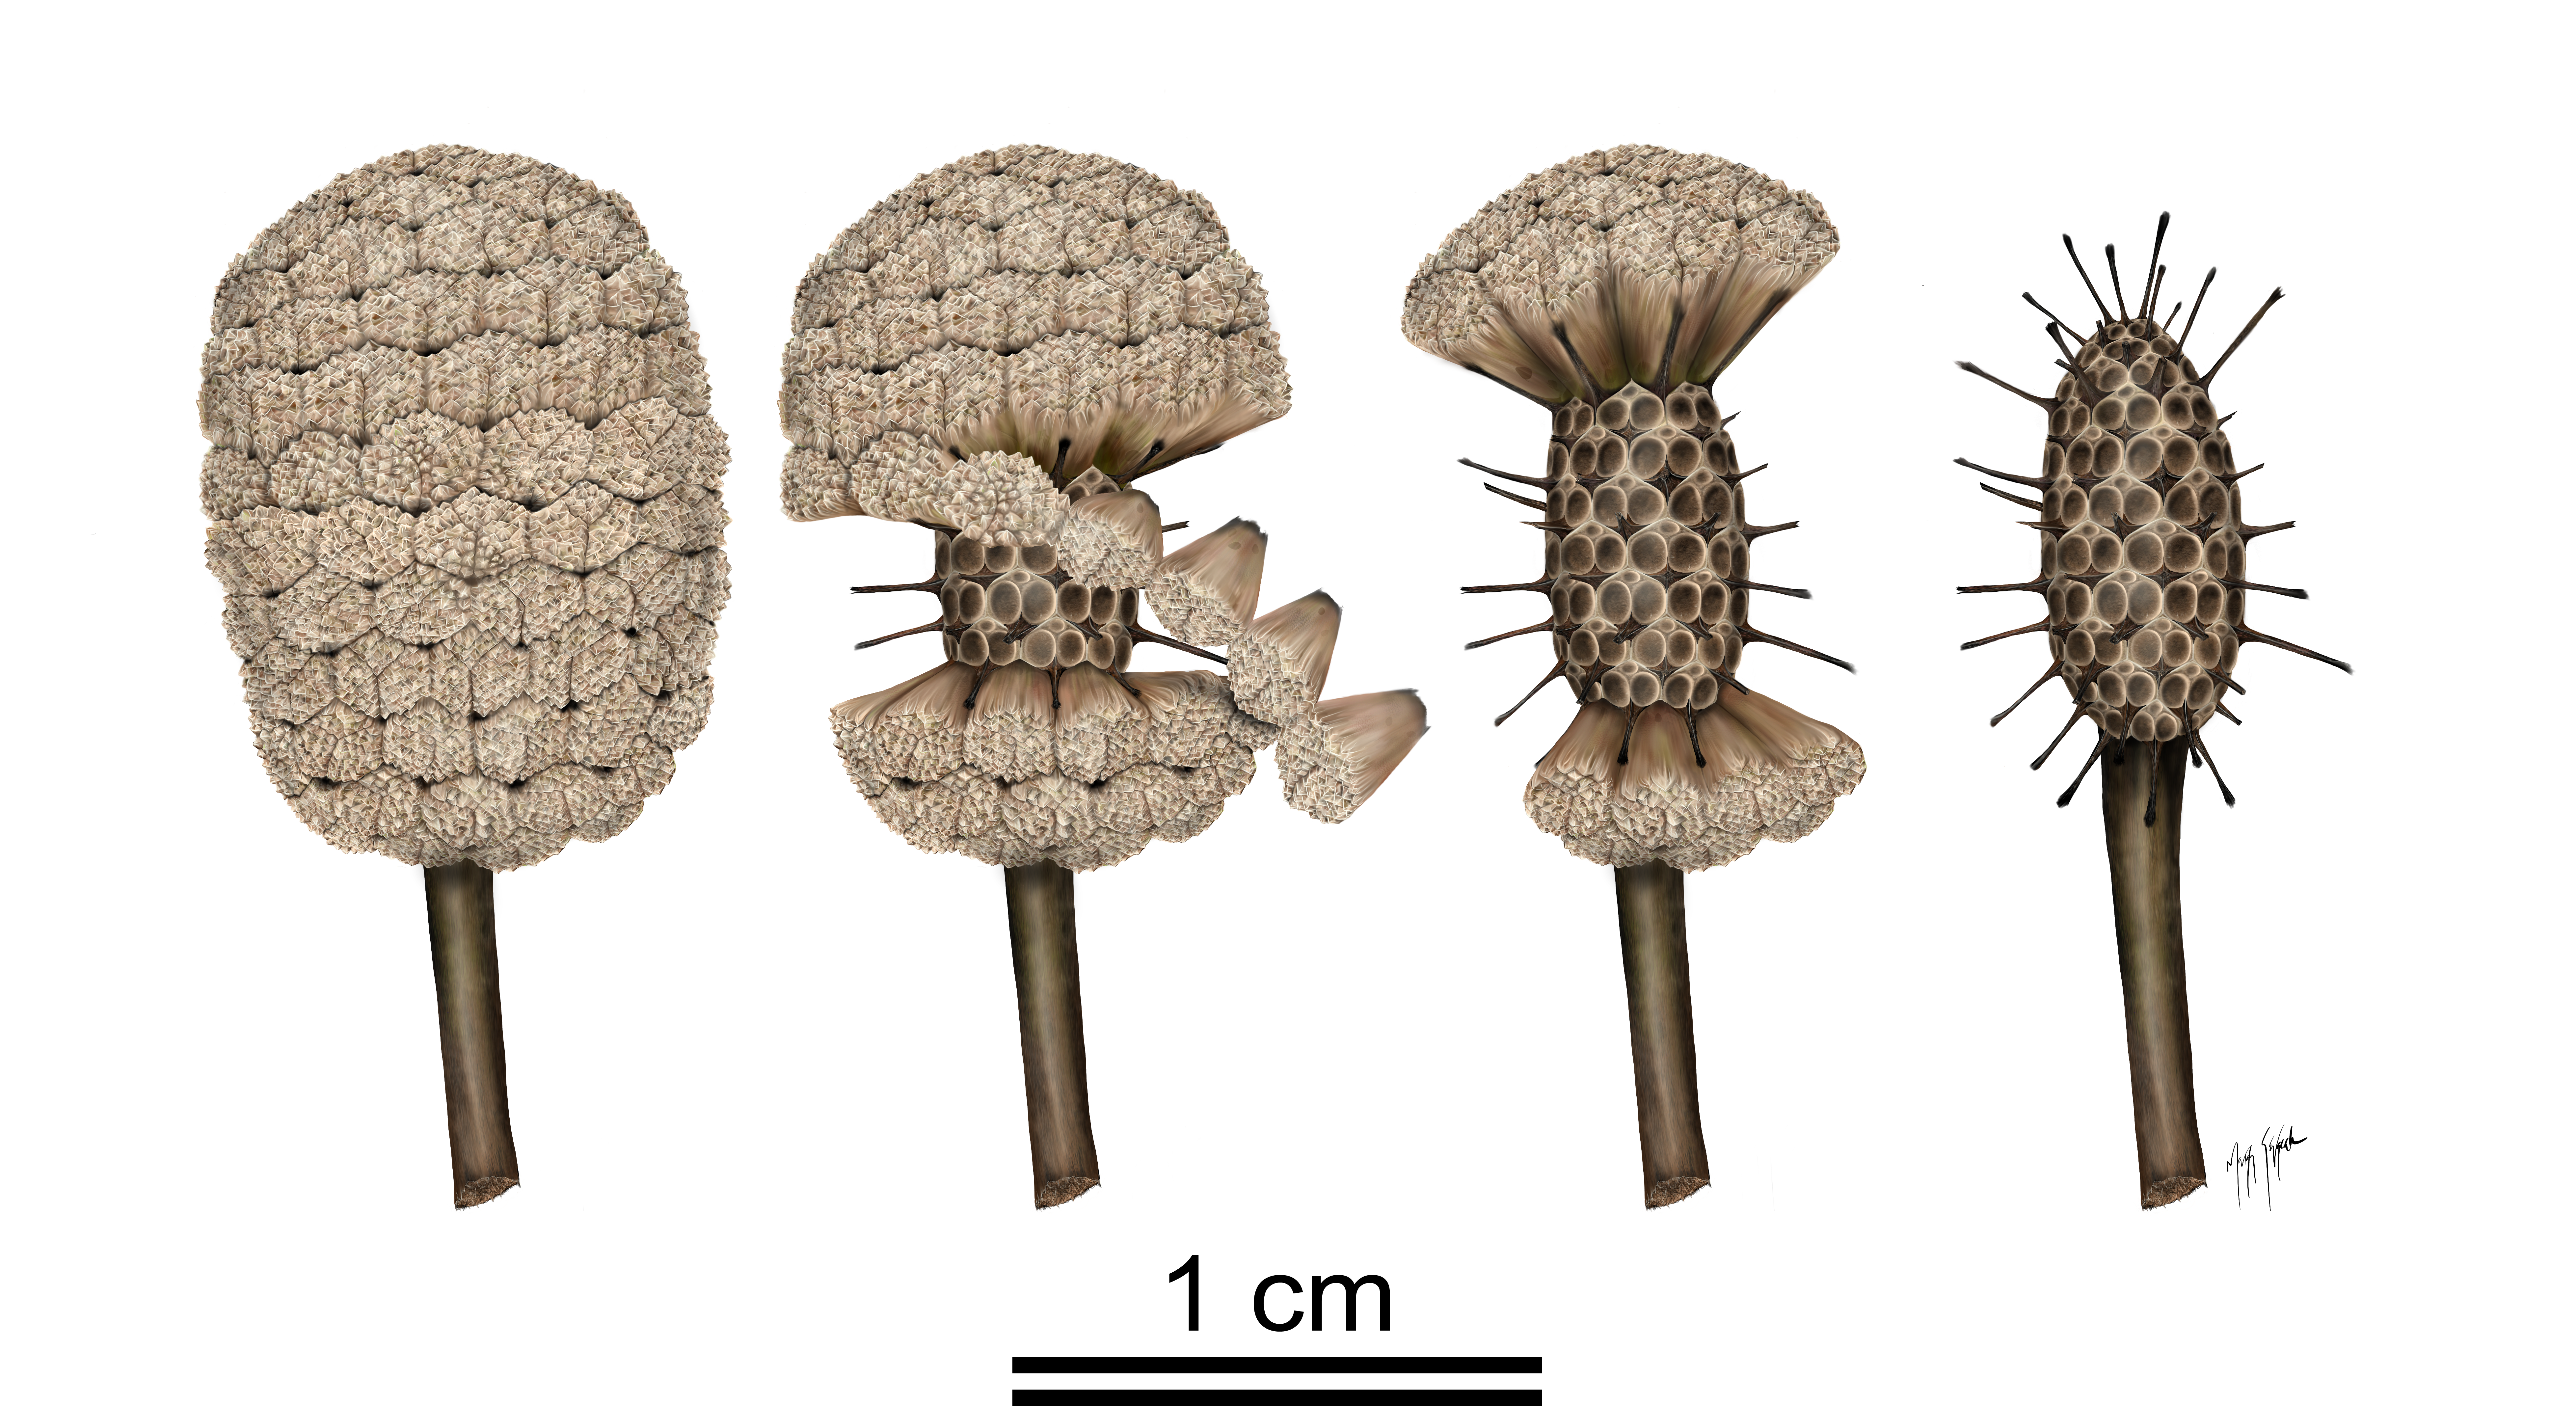 Four images showing progressive loss of wedges on Fagopsis fruit.